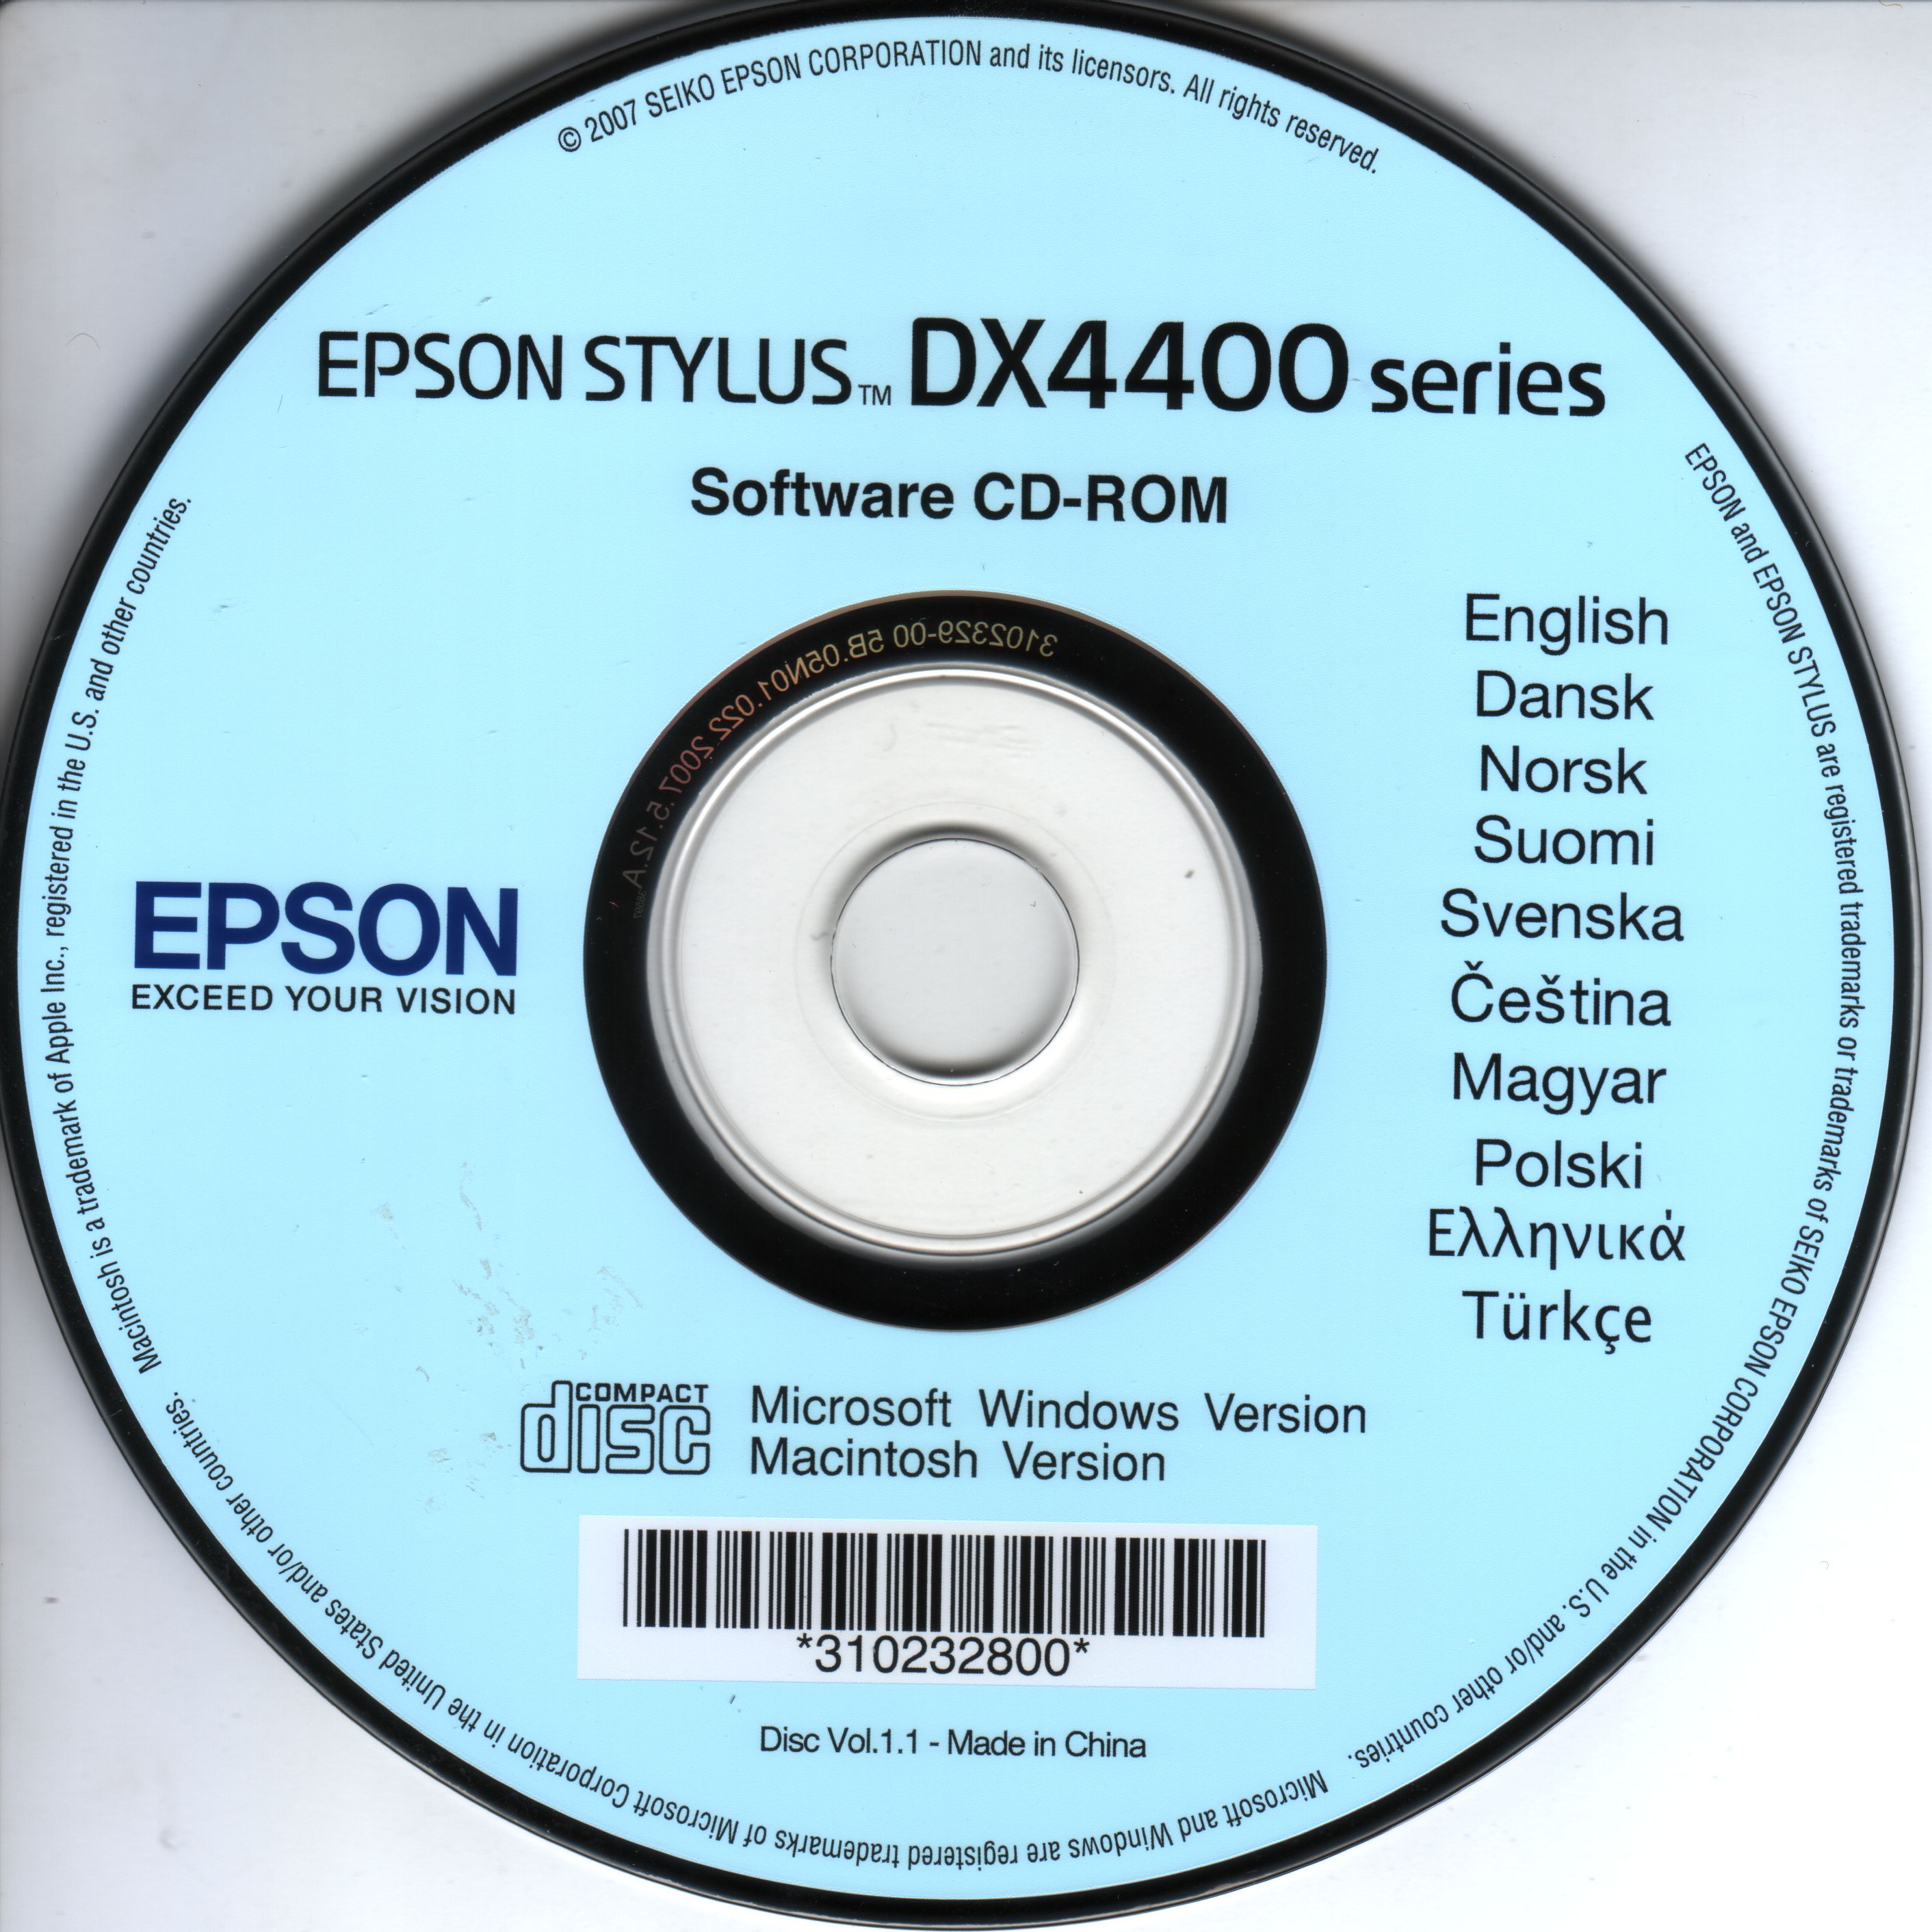 Epson Stylus DX4400 series driver CD 2 : Seiko Epson Corporation : Free  Download, Borrow, and Streaming : Internet Archive